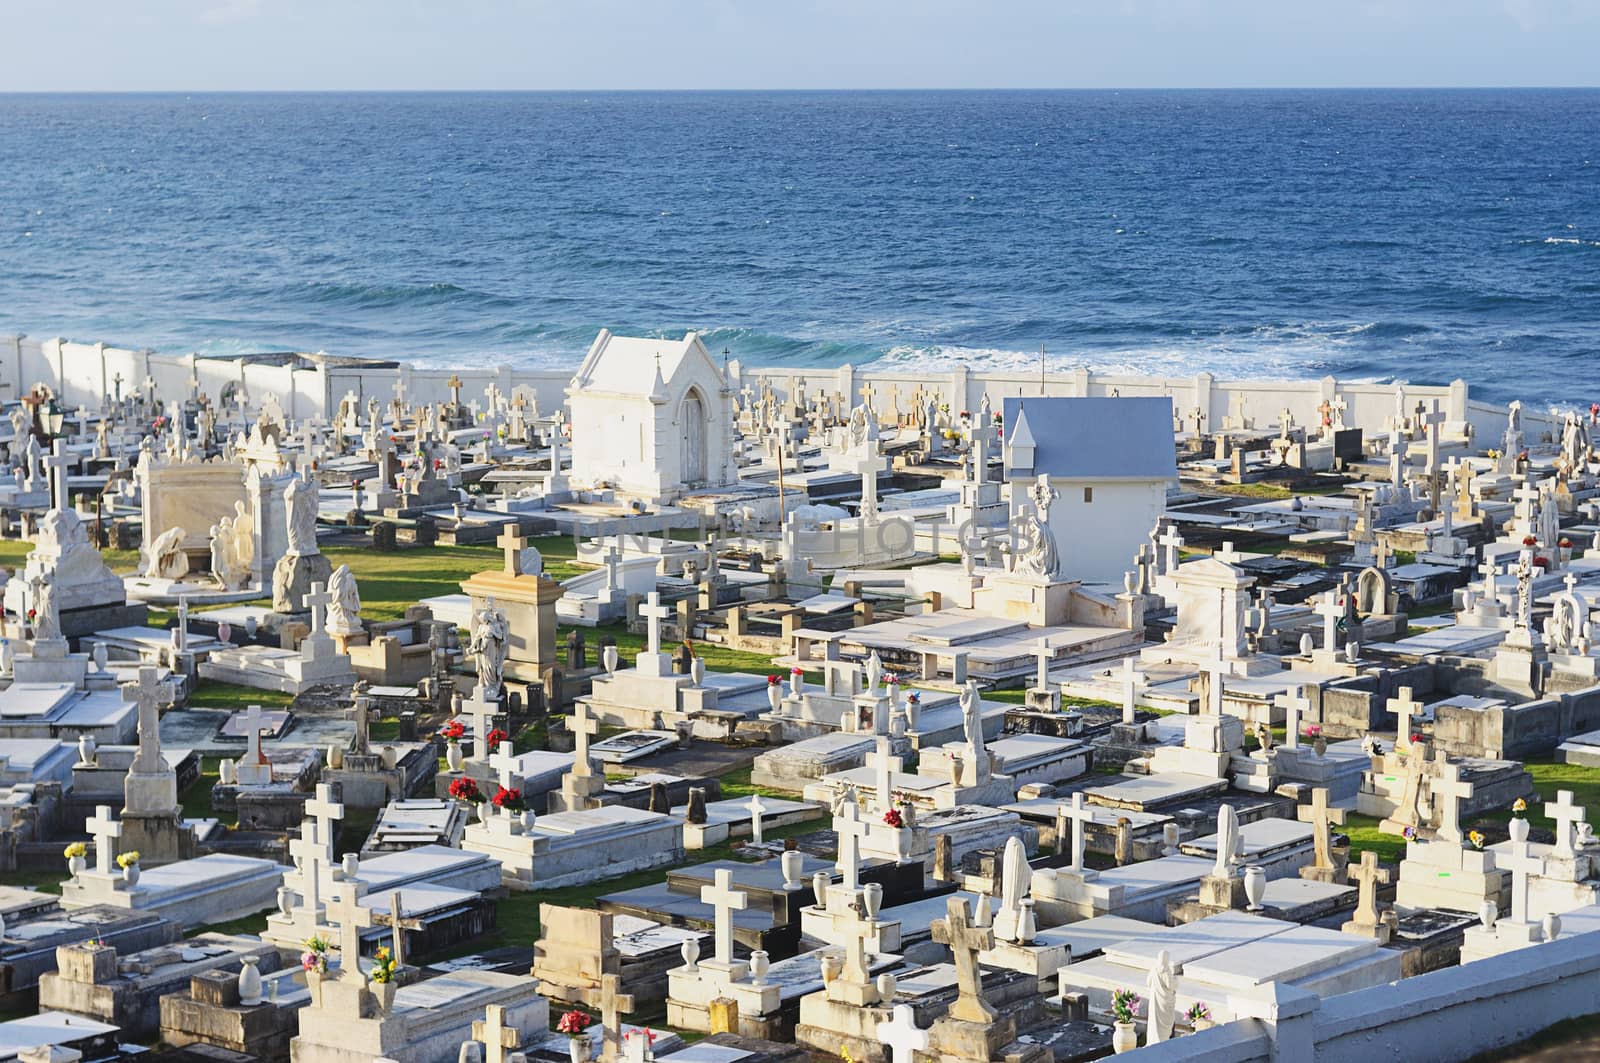 Cemetery at sea in Puerto Rico in sunny day